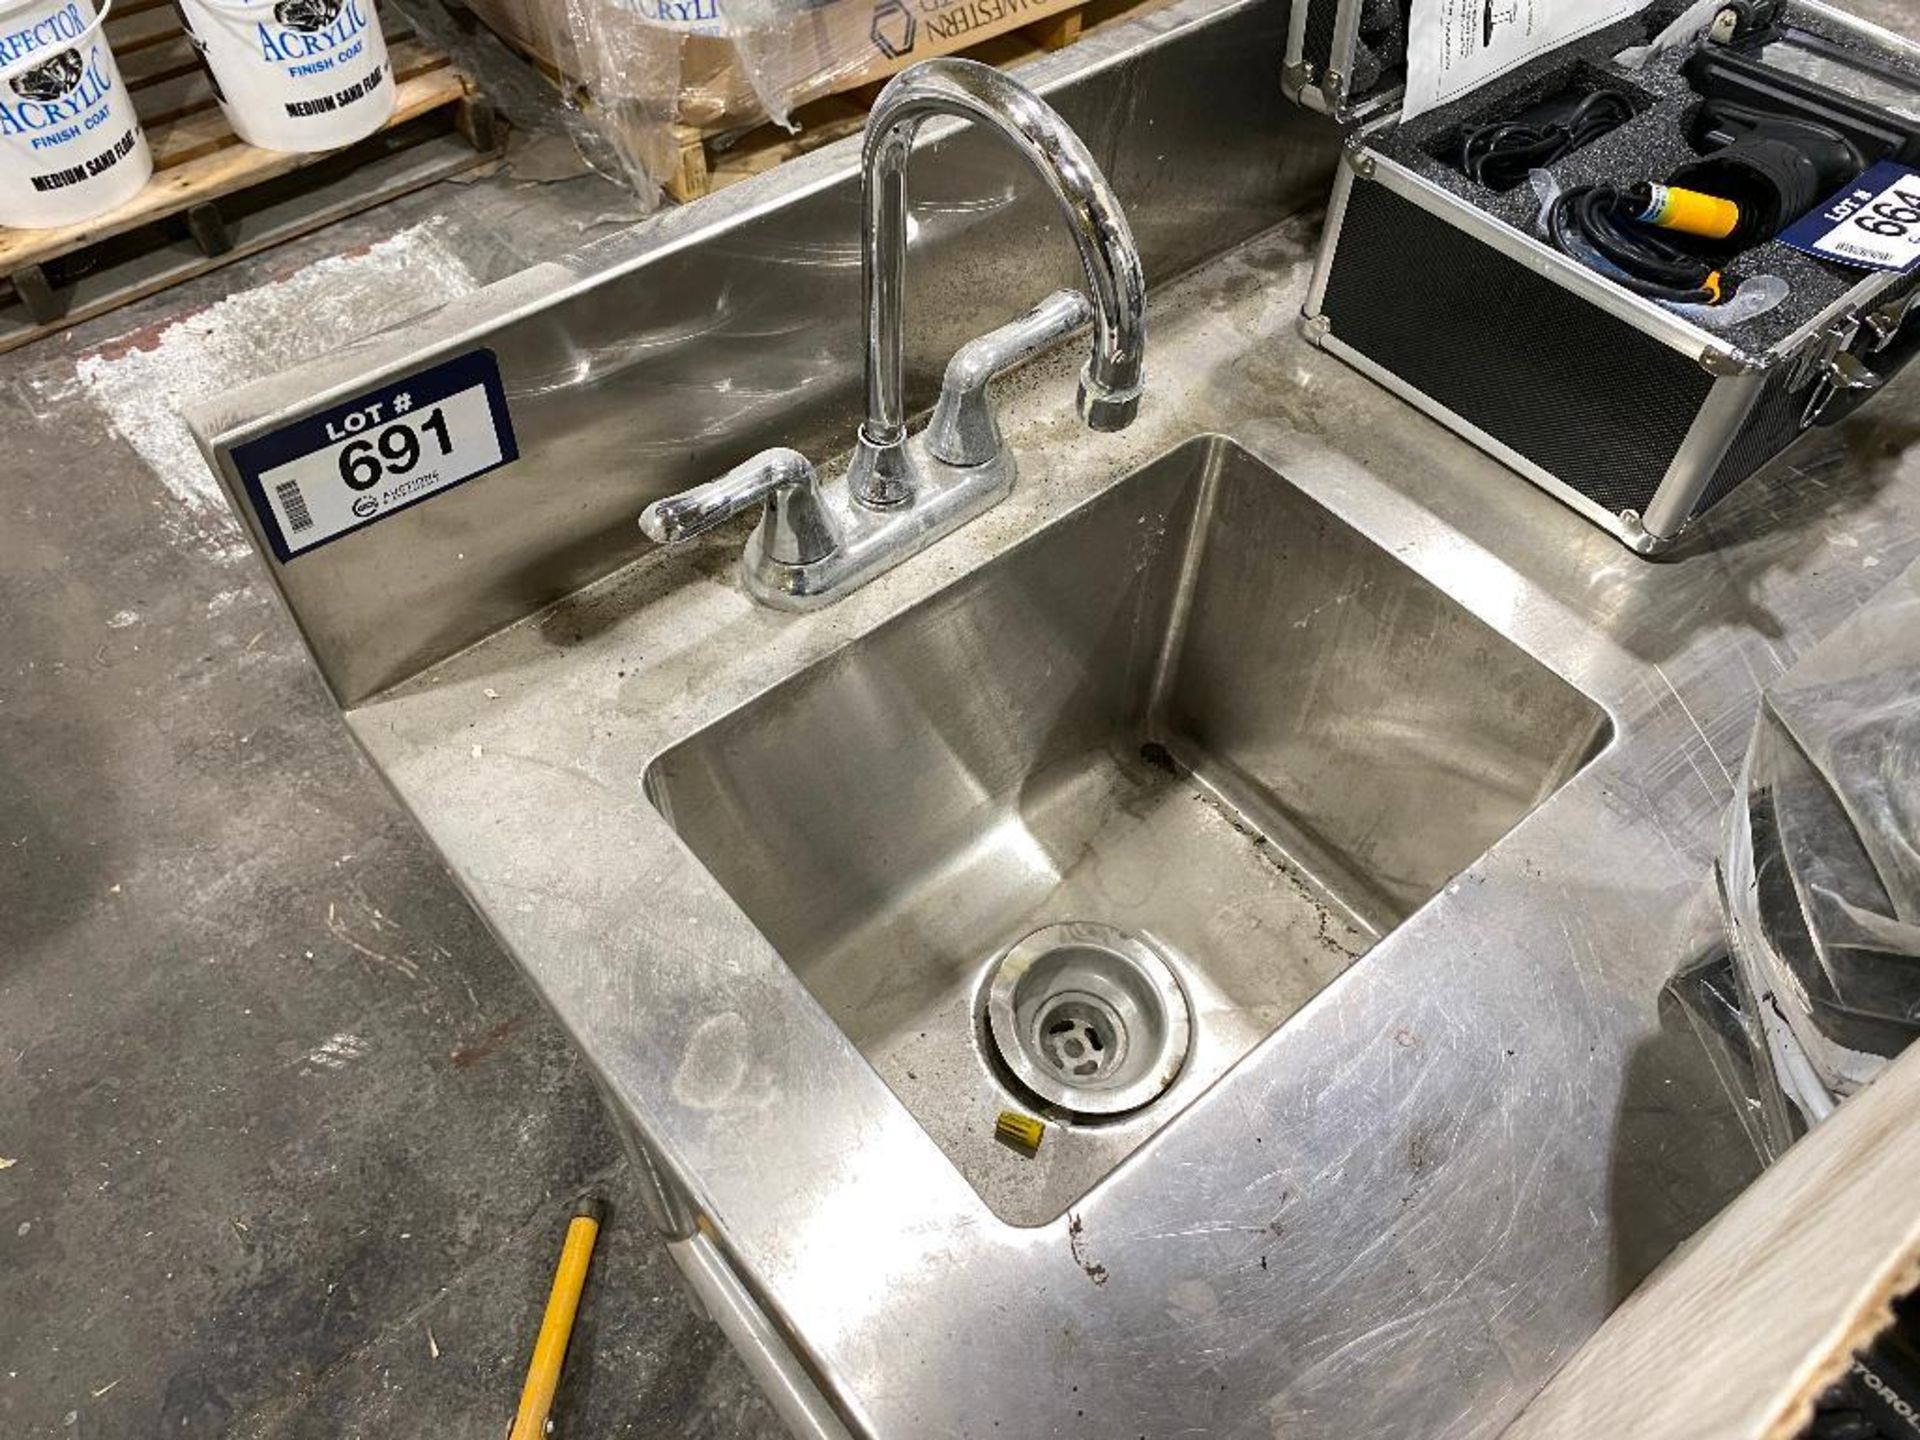 42" X 36"" Stainless Steel Table w/ Sink - Image 3 of 3